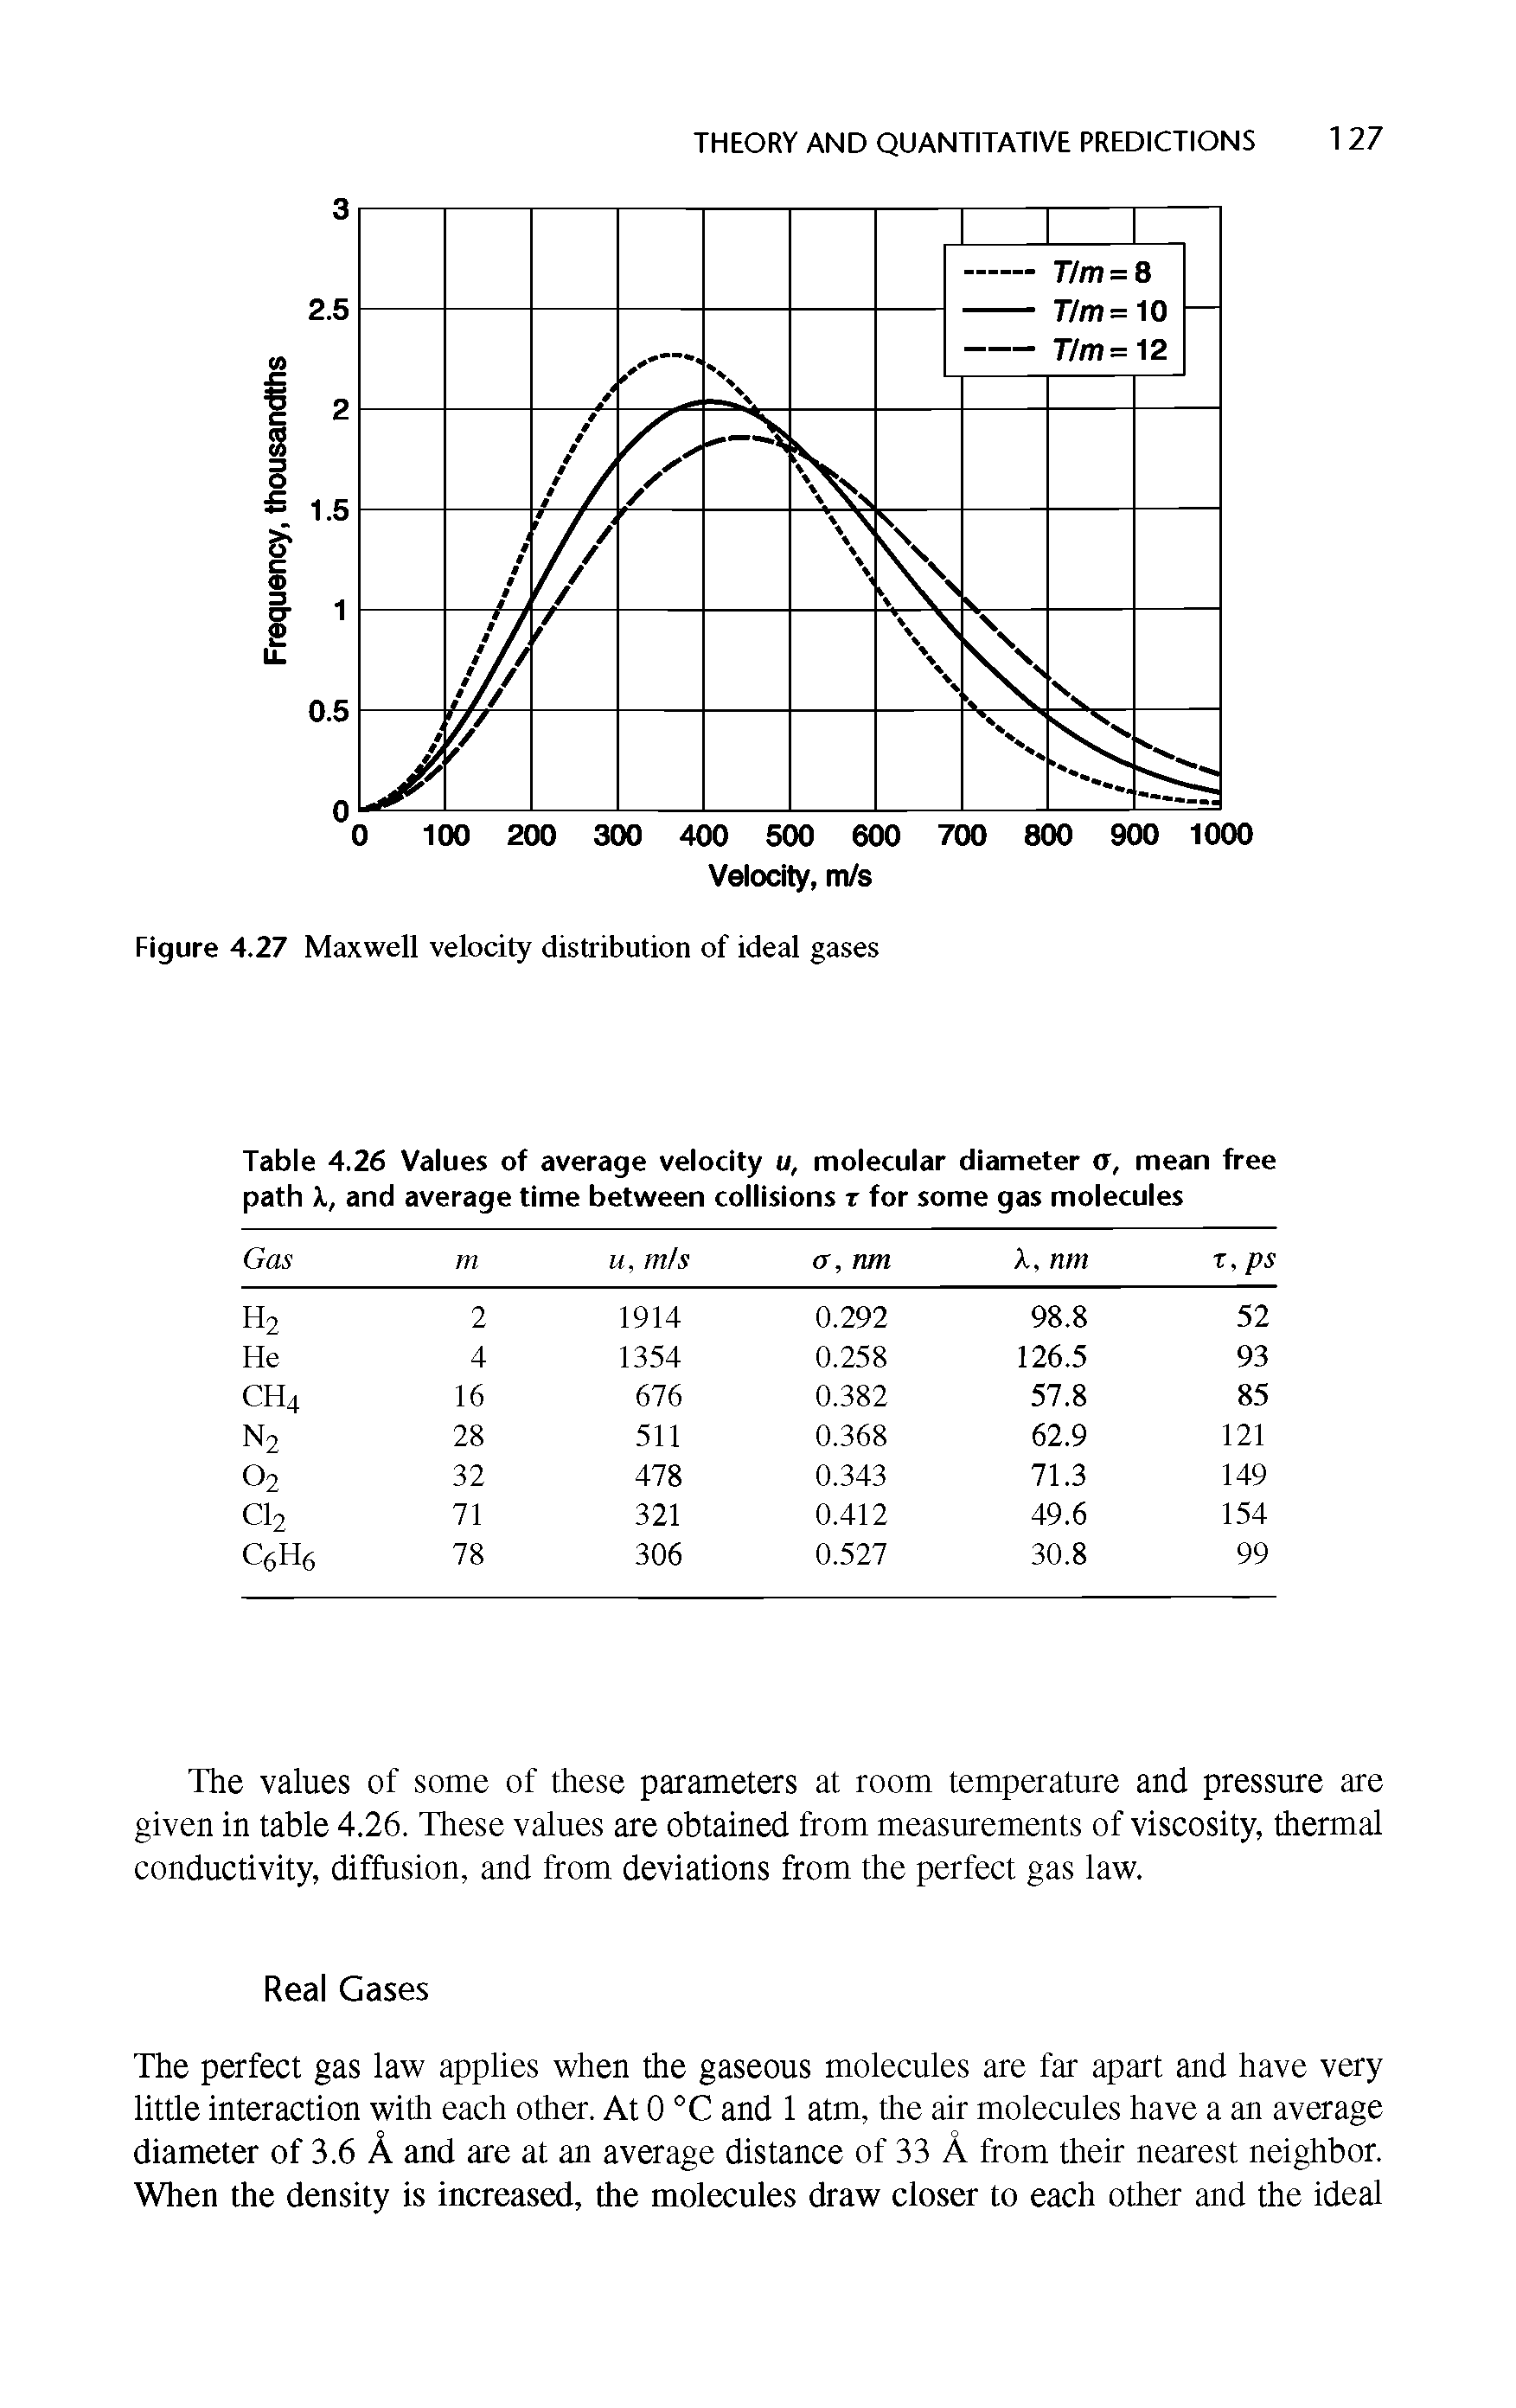 Figure 4.27 Maxwell velocity distribution of ideal gases...